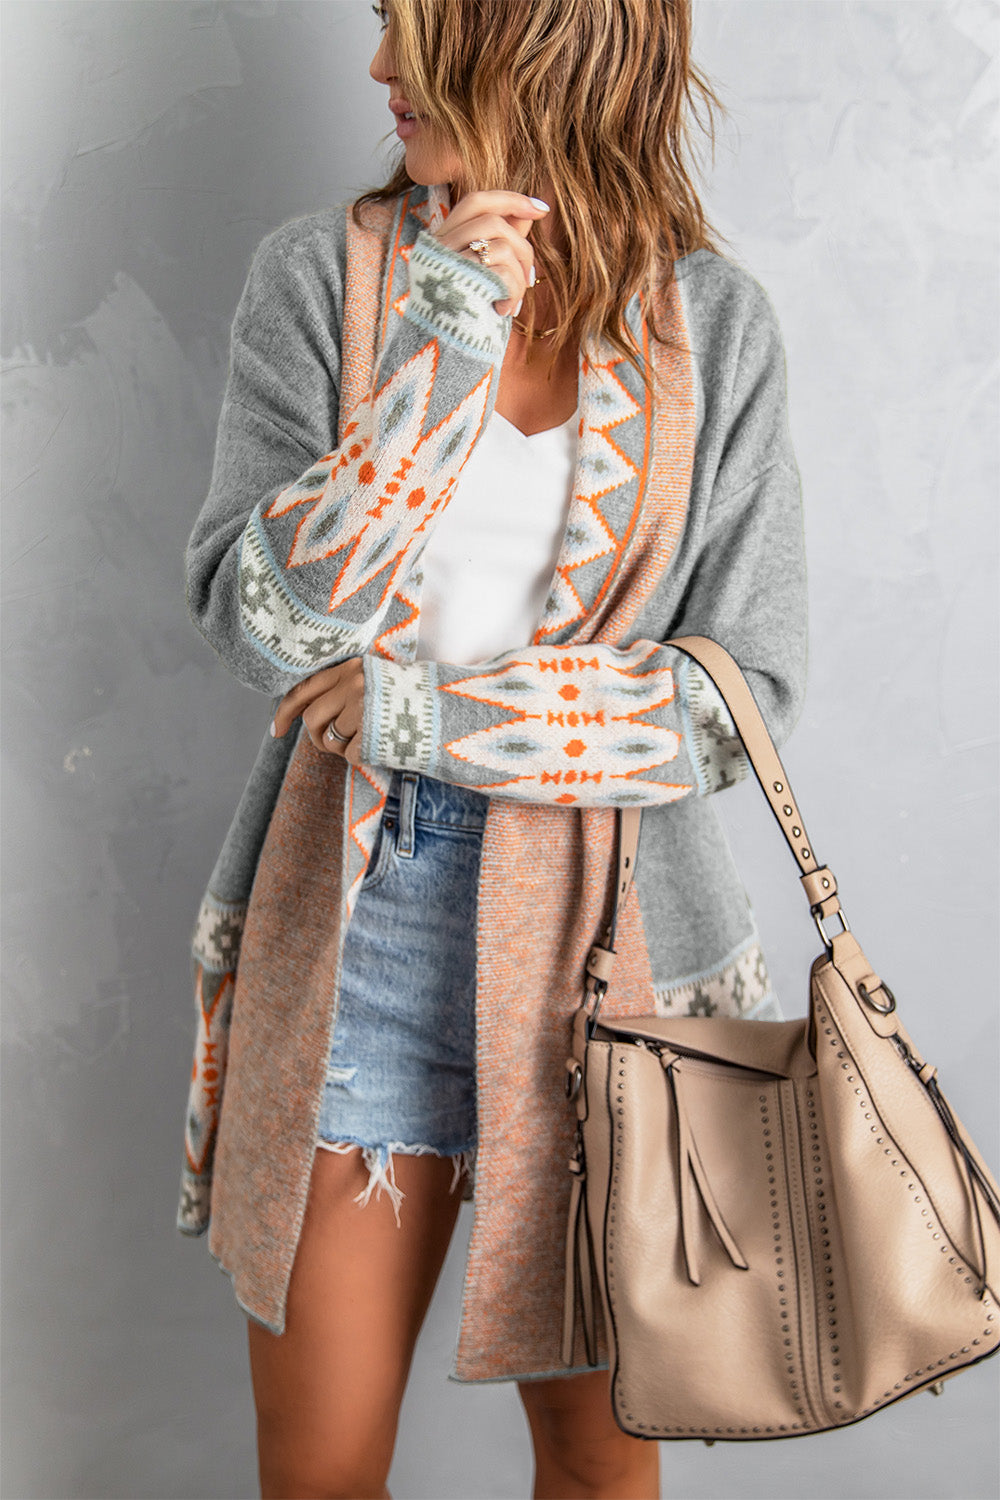 Gray Aztec Print Open Front Knitted Cardigan